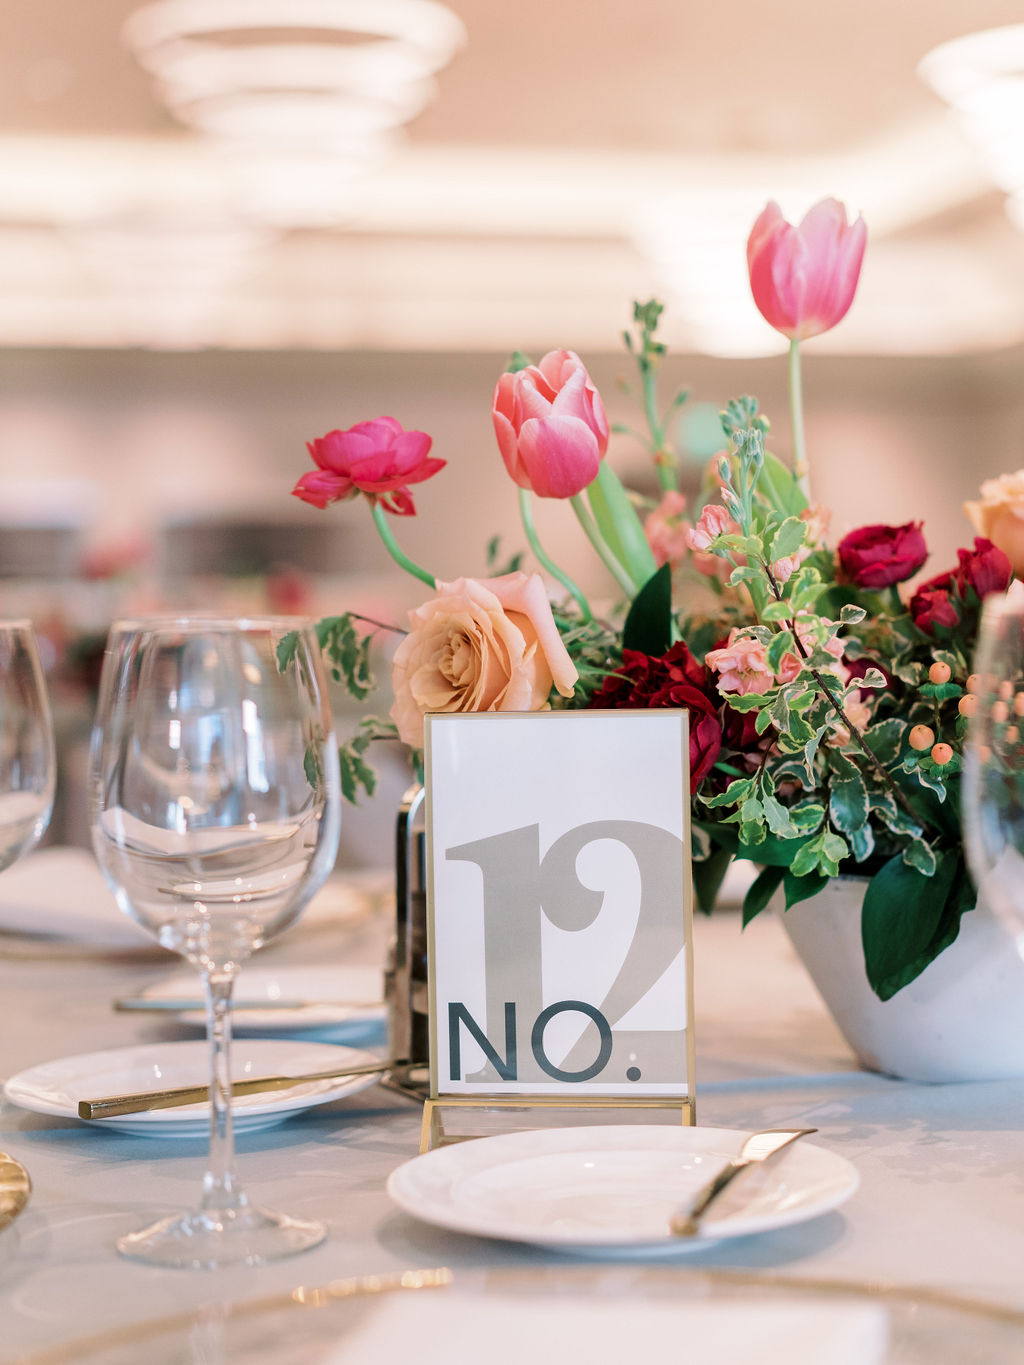 Table number and wedding reception centerpiece.